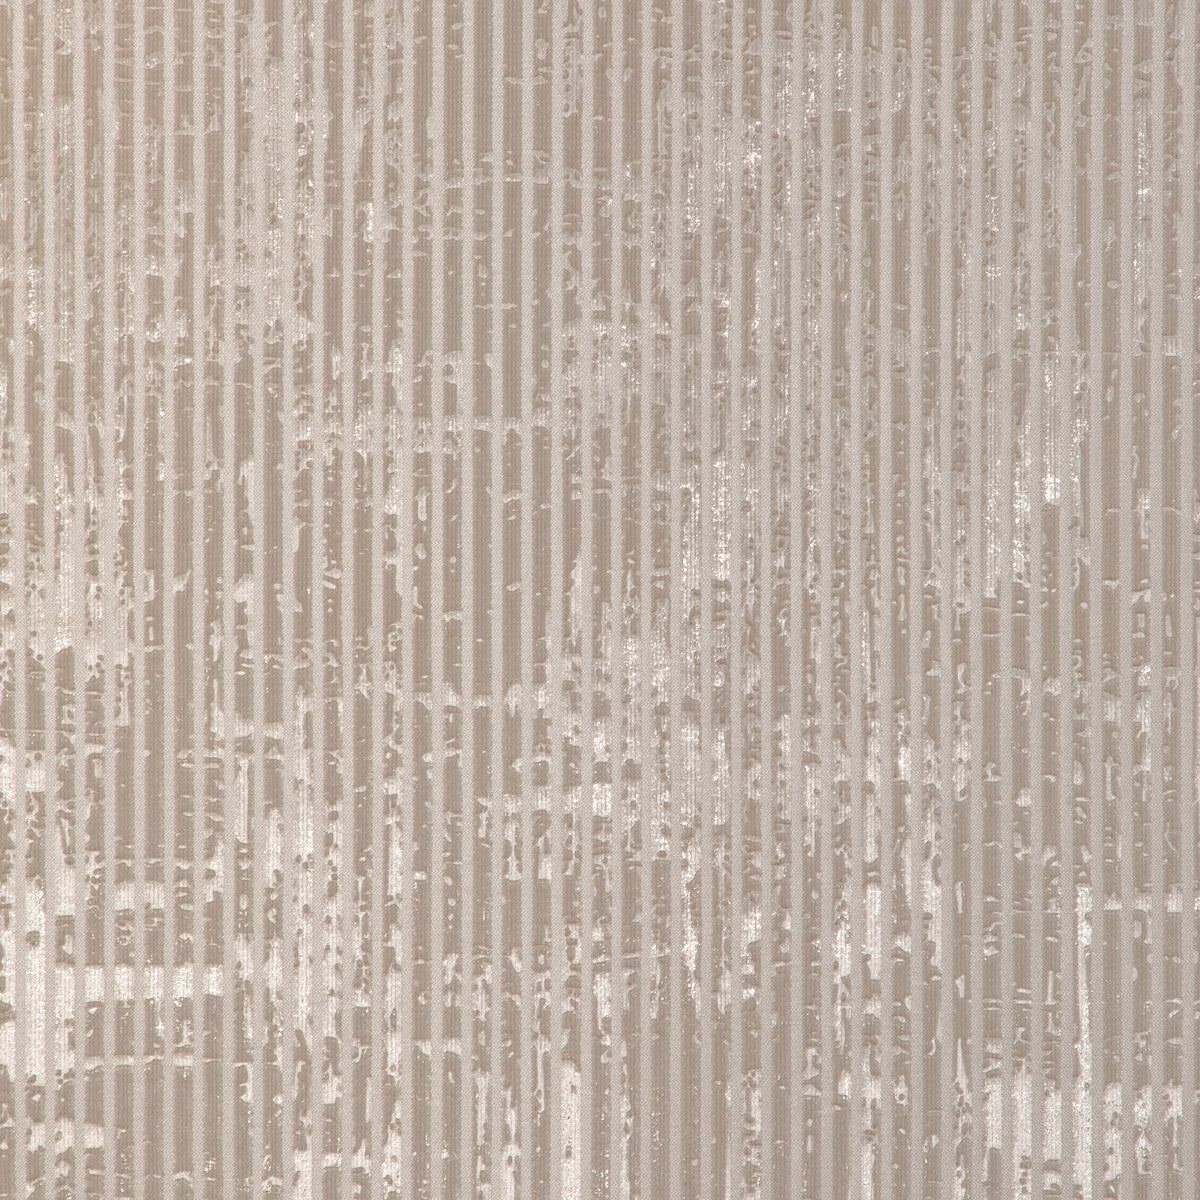 Starstruck fabric in prosecco color - pattern 37280.1.0 - by Kravet Contract in the Happy Hour collection